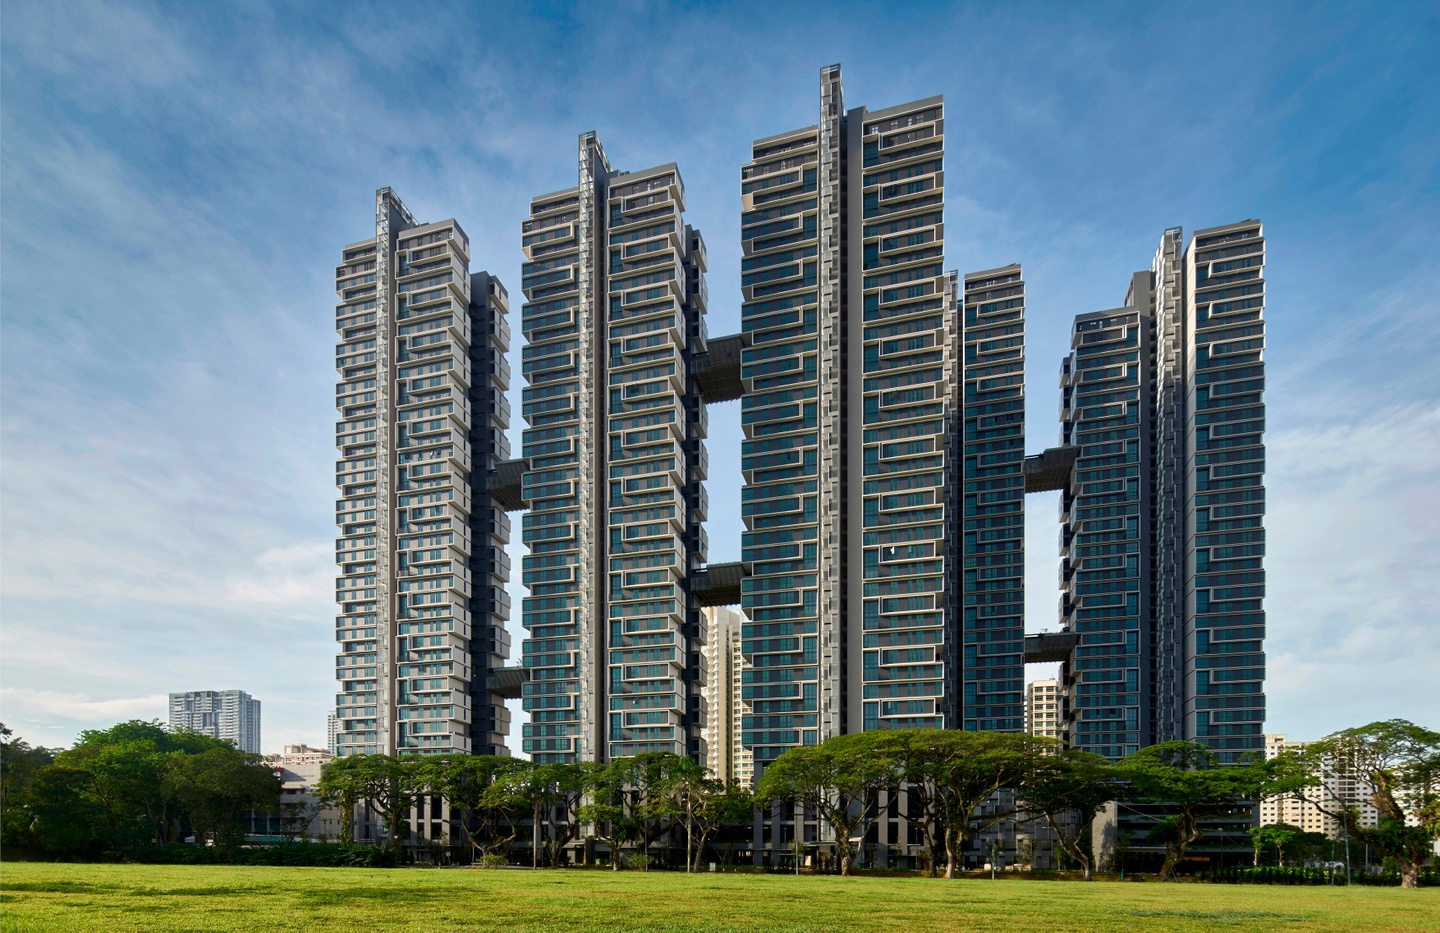 Photo of apartment buildings with 5 towers joined by walkway bridges